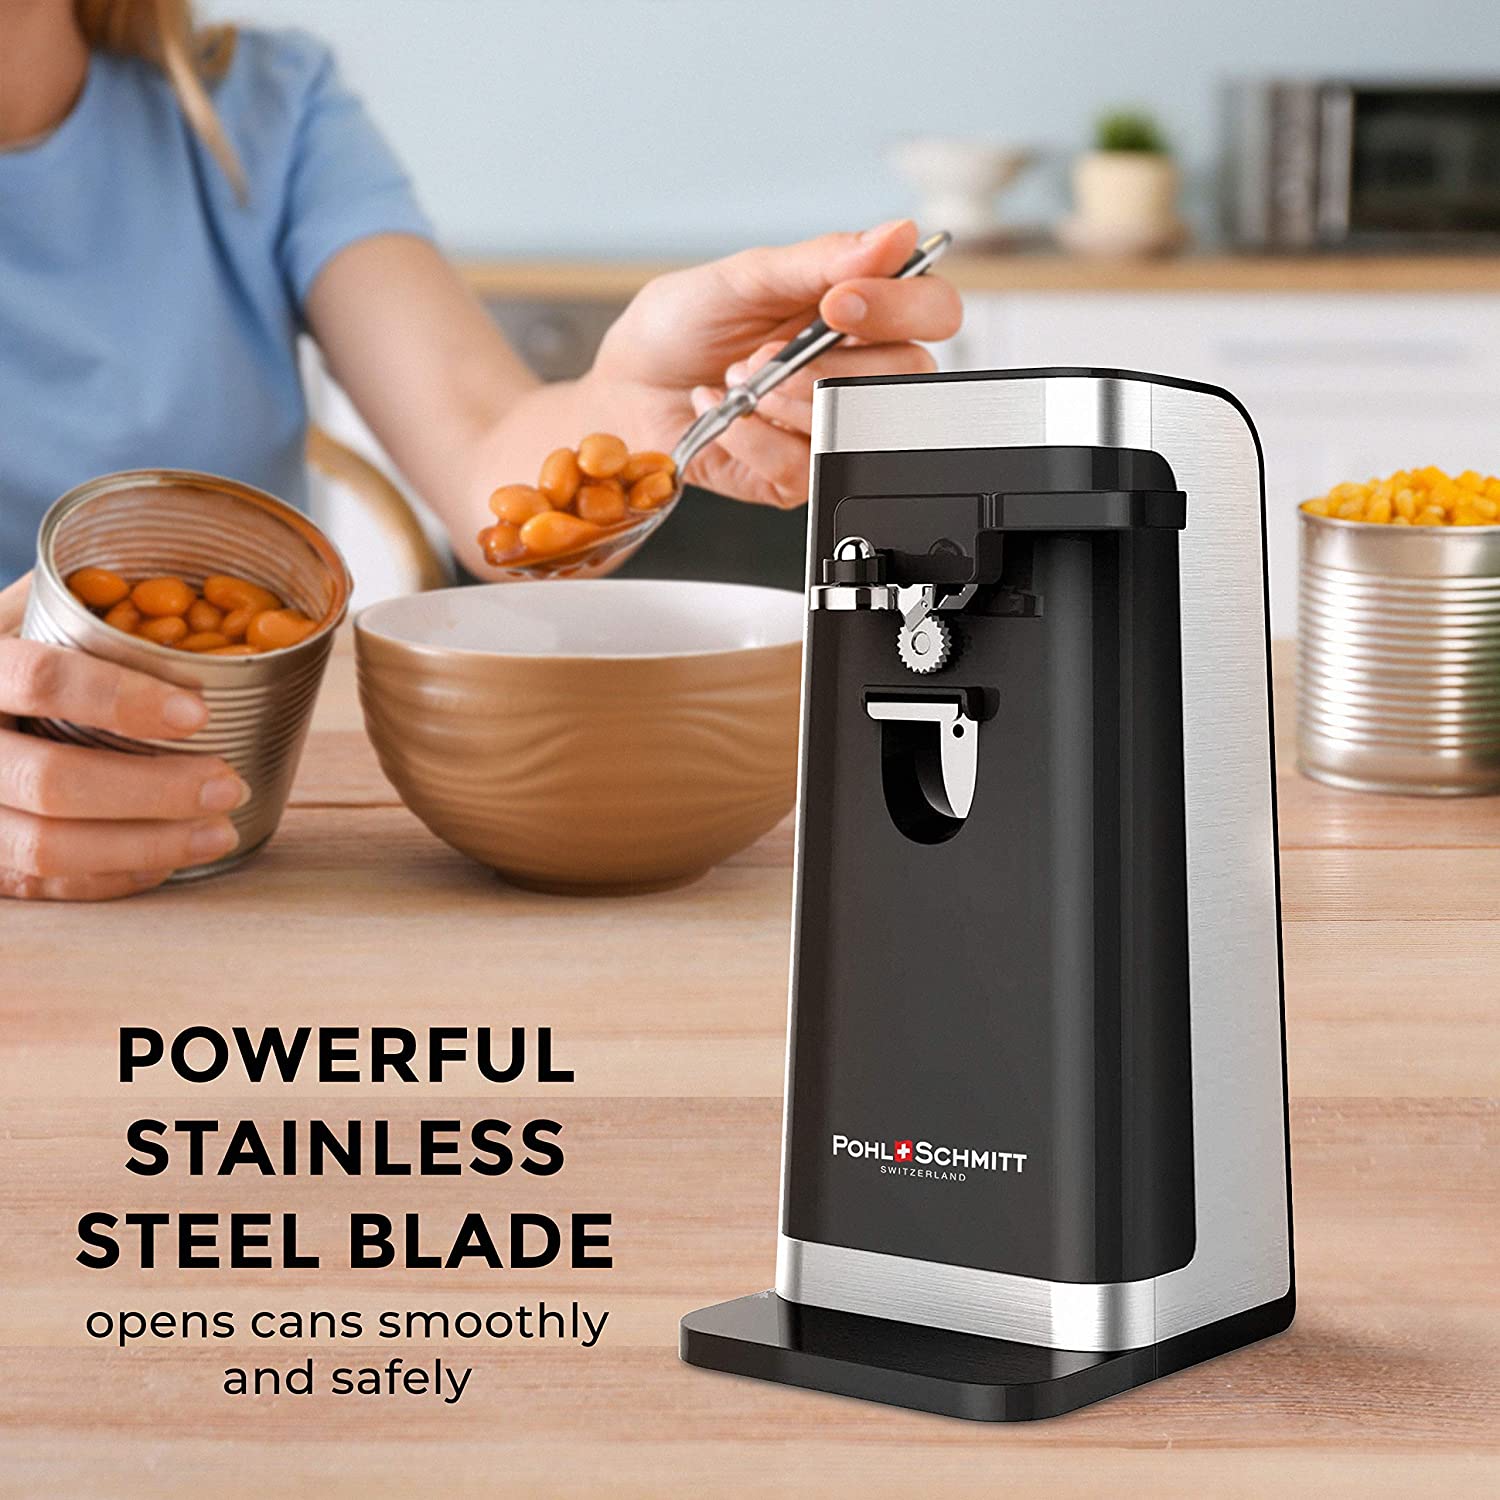 Kitchen Mama One Touch Can Opener: Open Cans with Simple Press of A Button  - Auto Stop As Task Completes, Ergonomic, Smooth Edge, Food-Safe, Battery